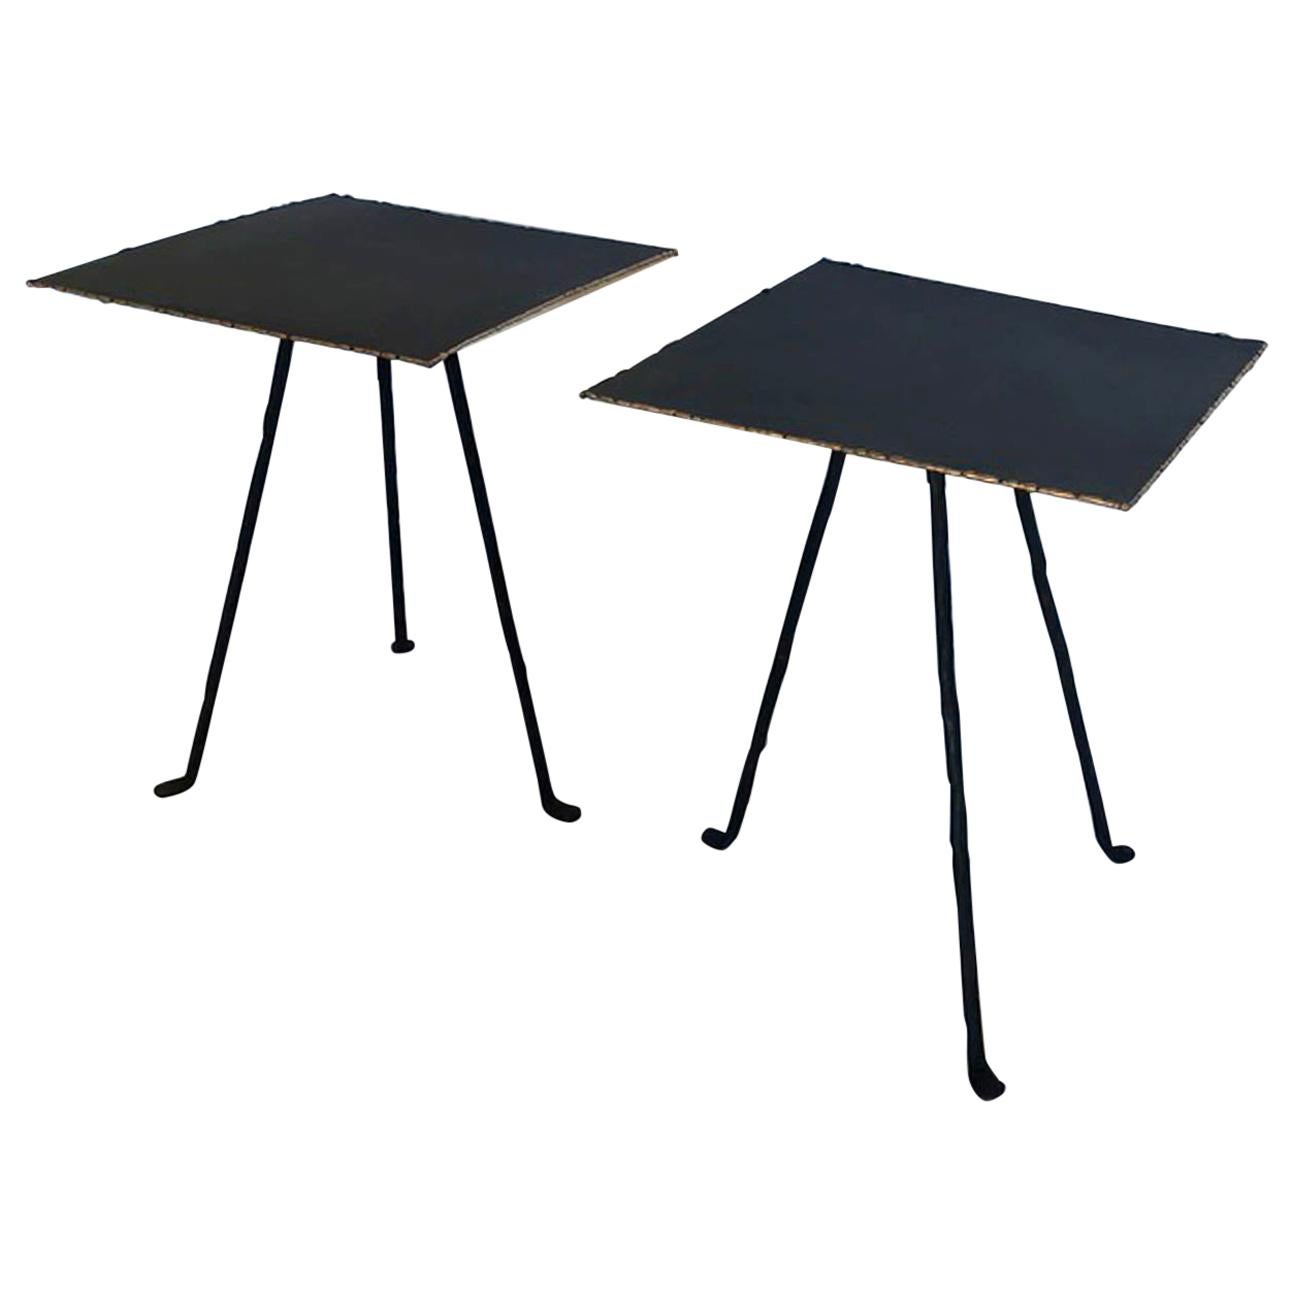 Iron and Bronze Tripod Tables